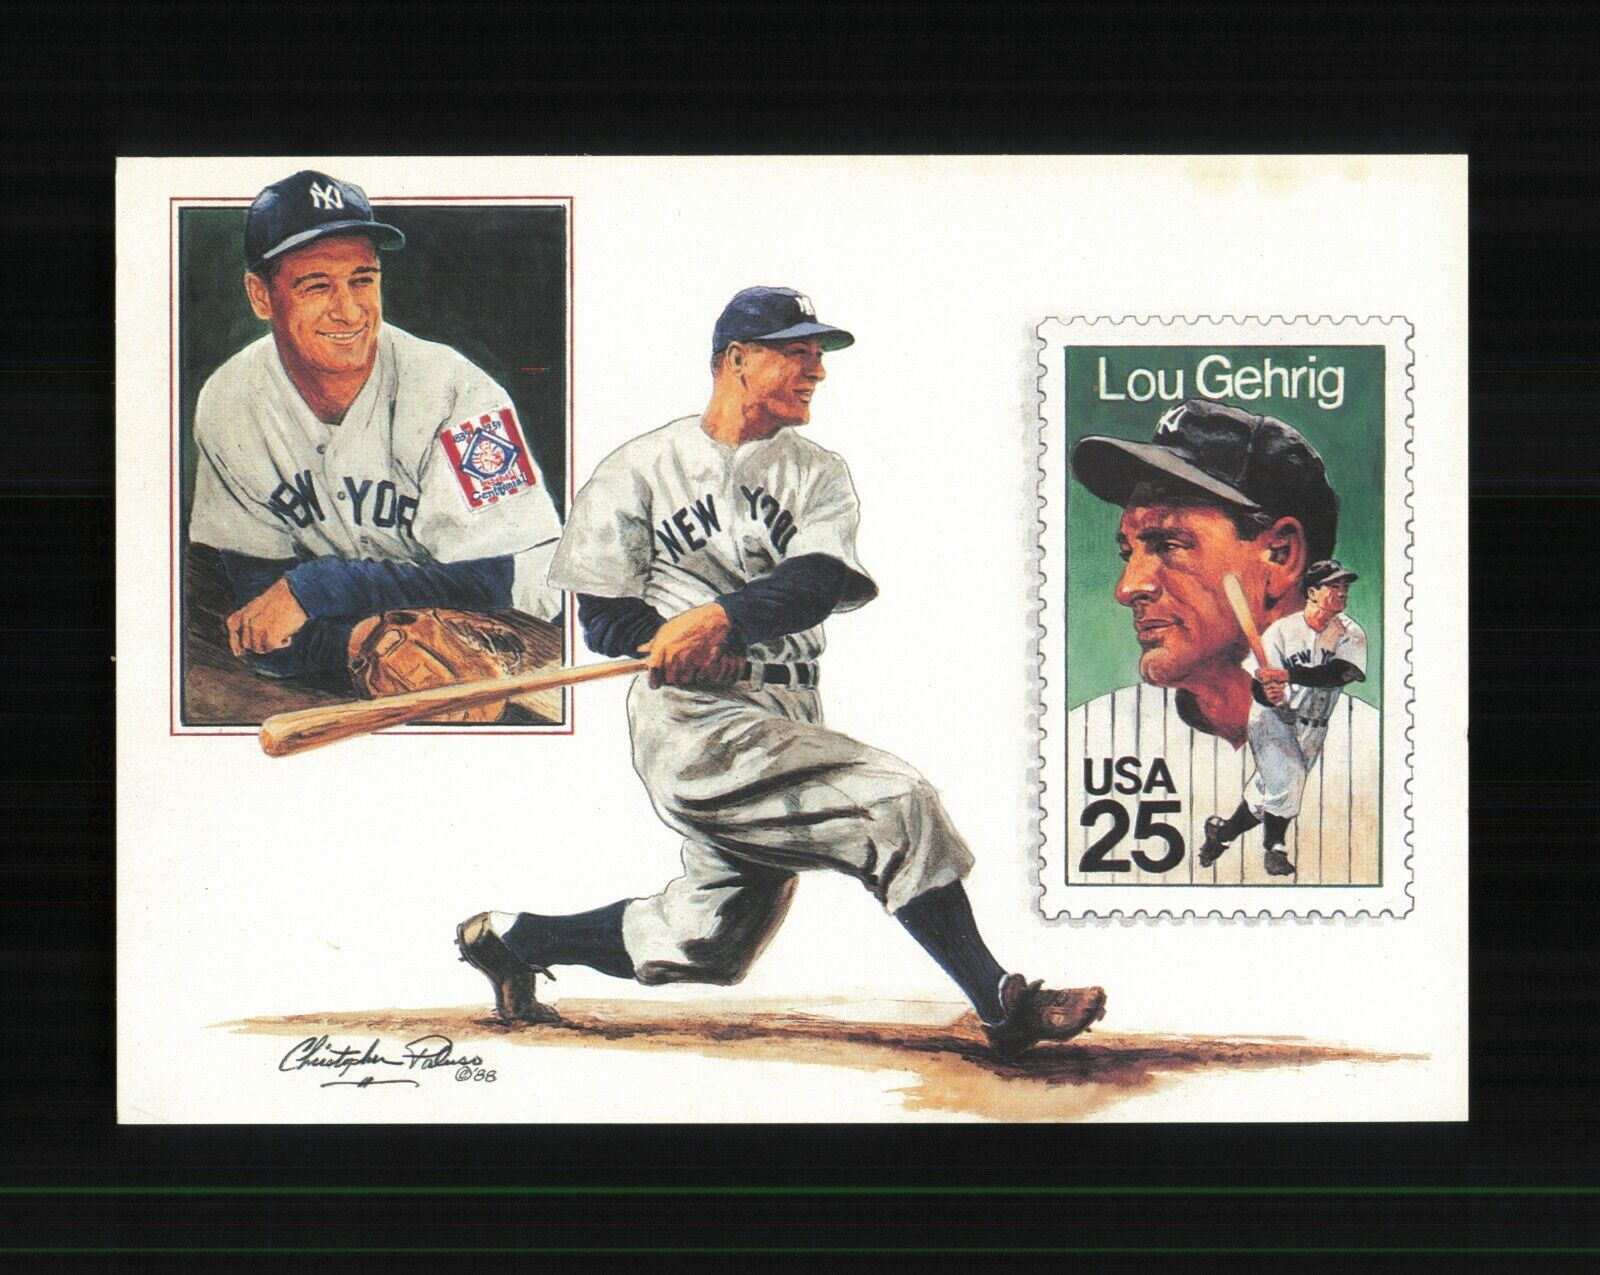 1990 LOU GEHRIG POST CARD by CHRISTOPHER PALUSO